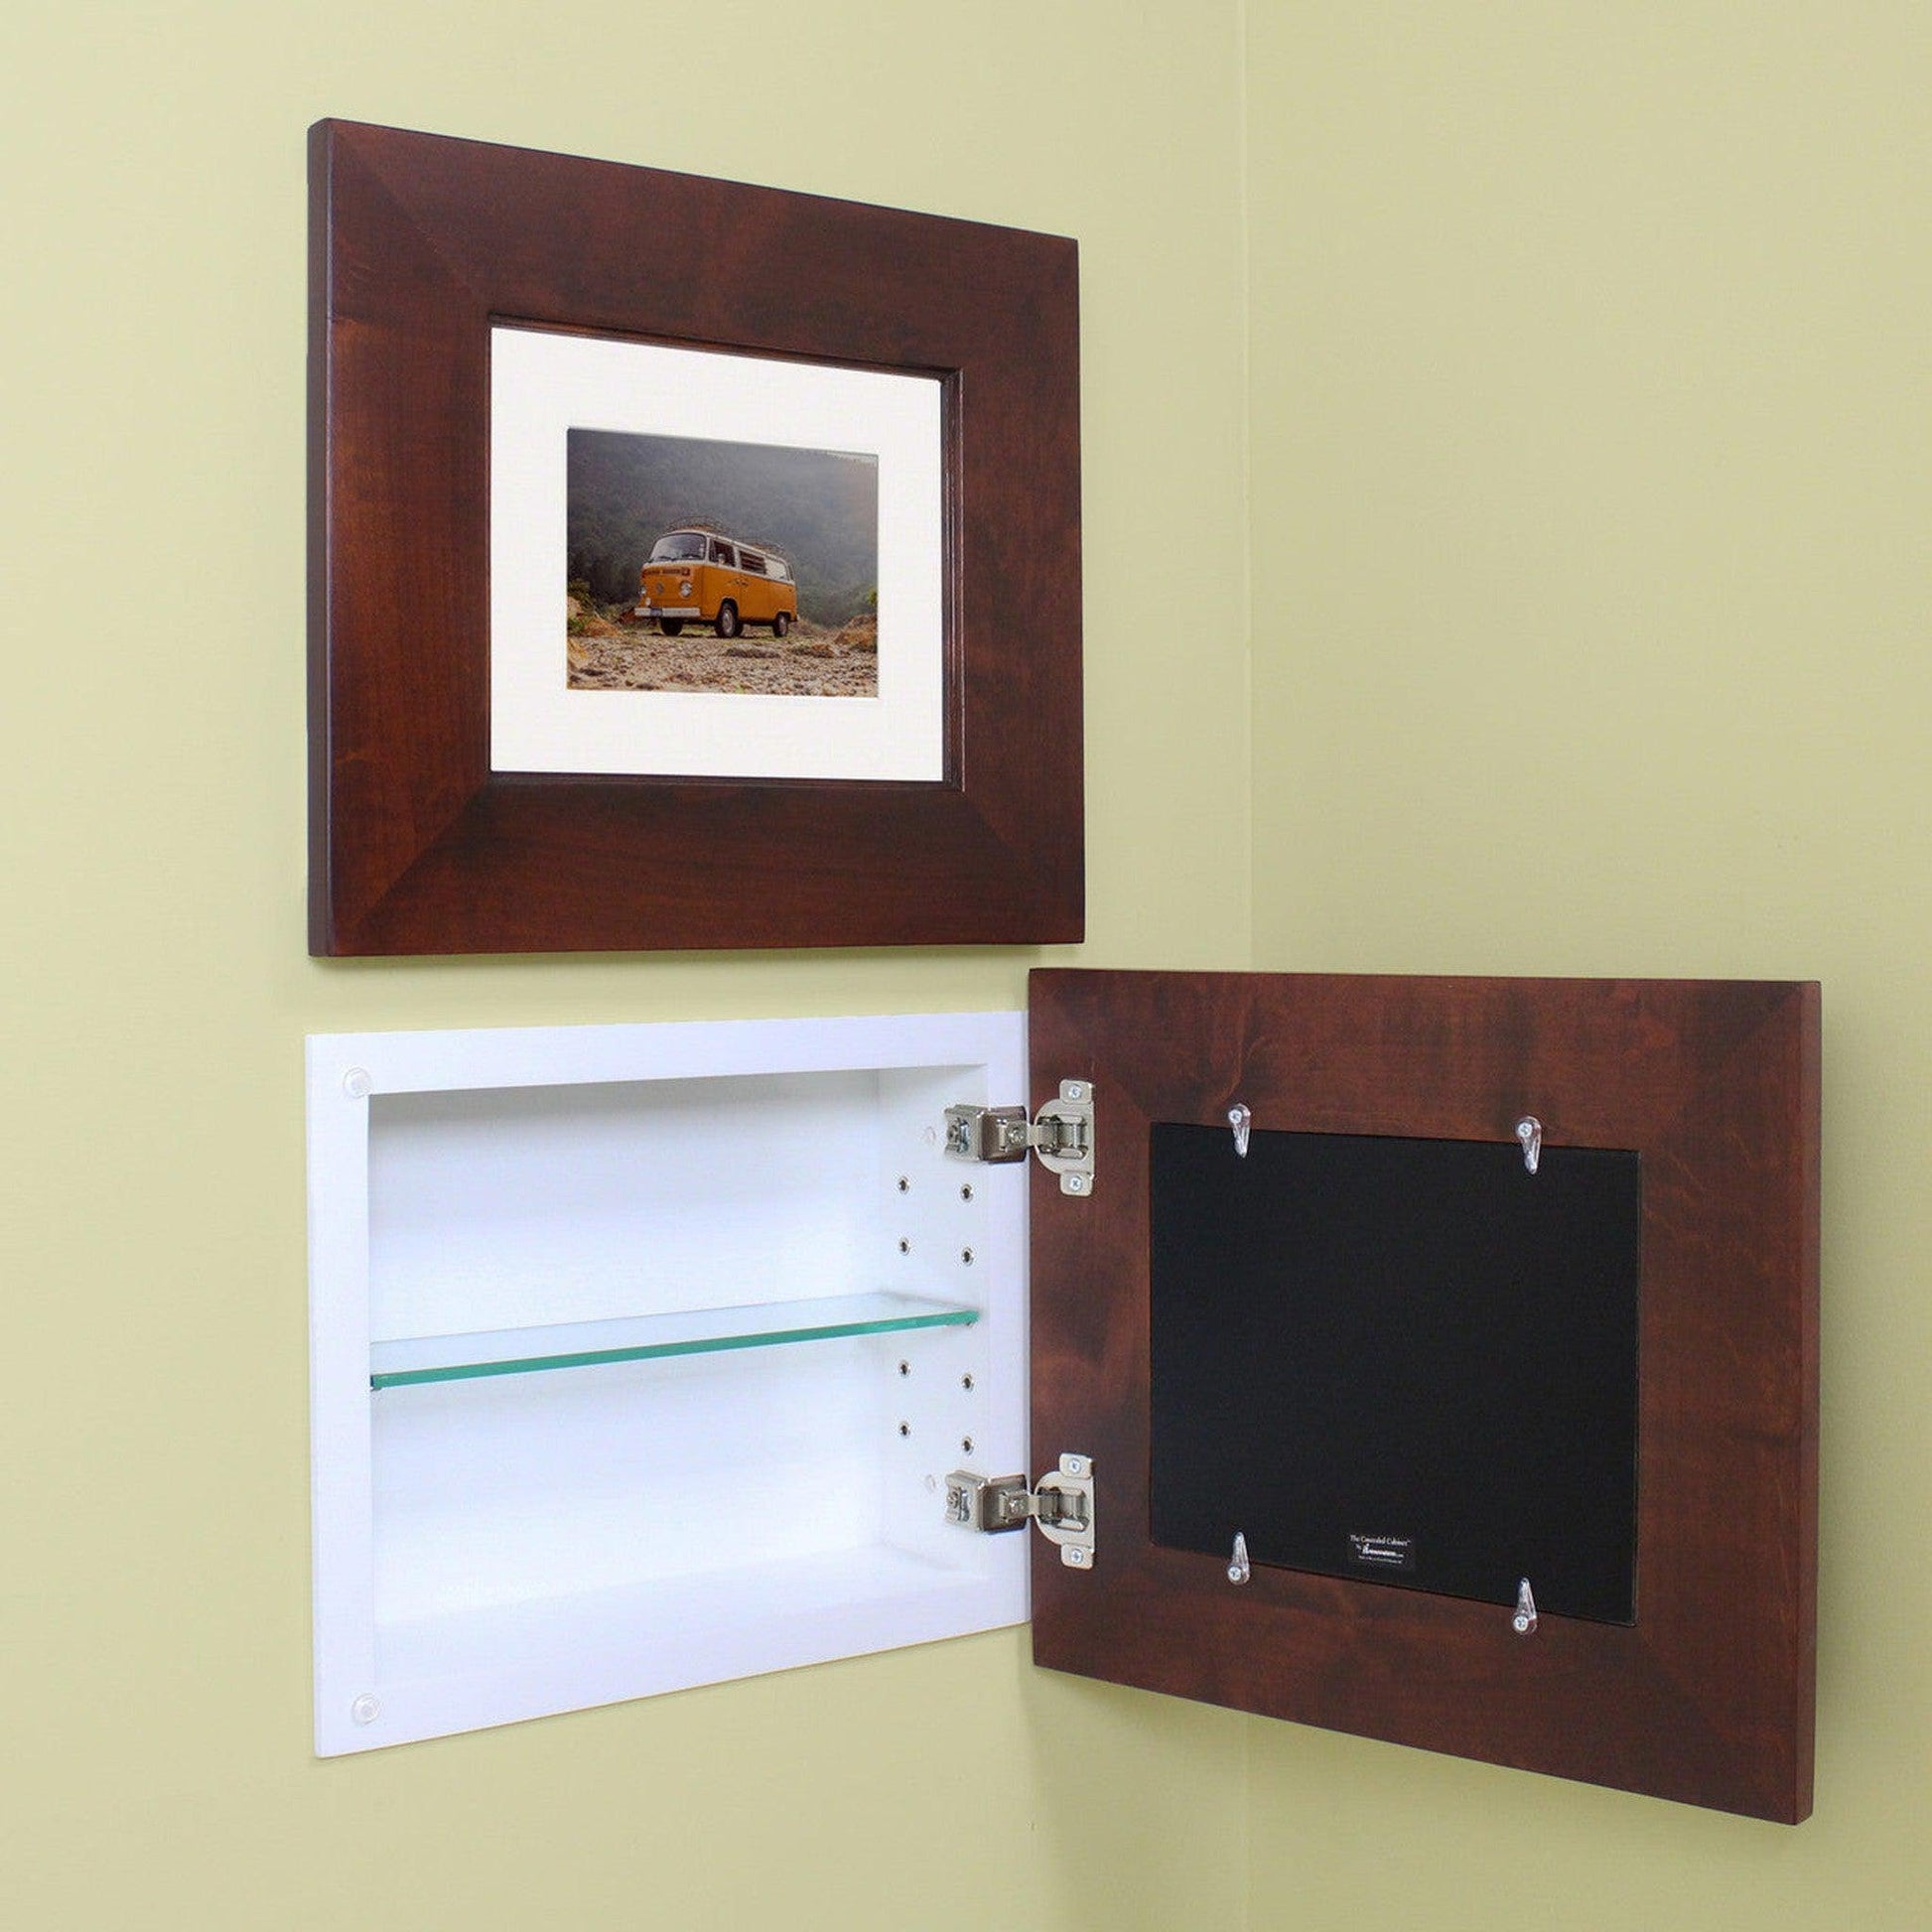 Fox Hollow Furnishings 14" x 11" Espresso Compact Landscape Recessed Picture Frame Medicine Cabinet With Mirror